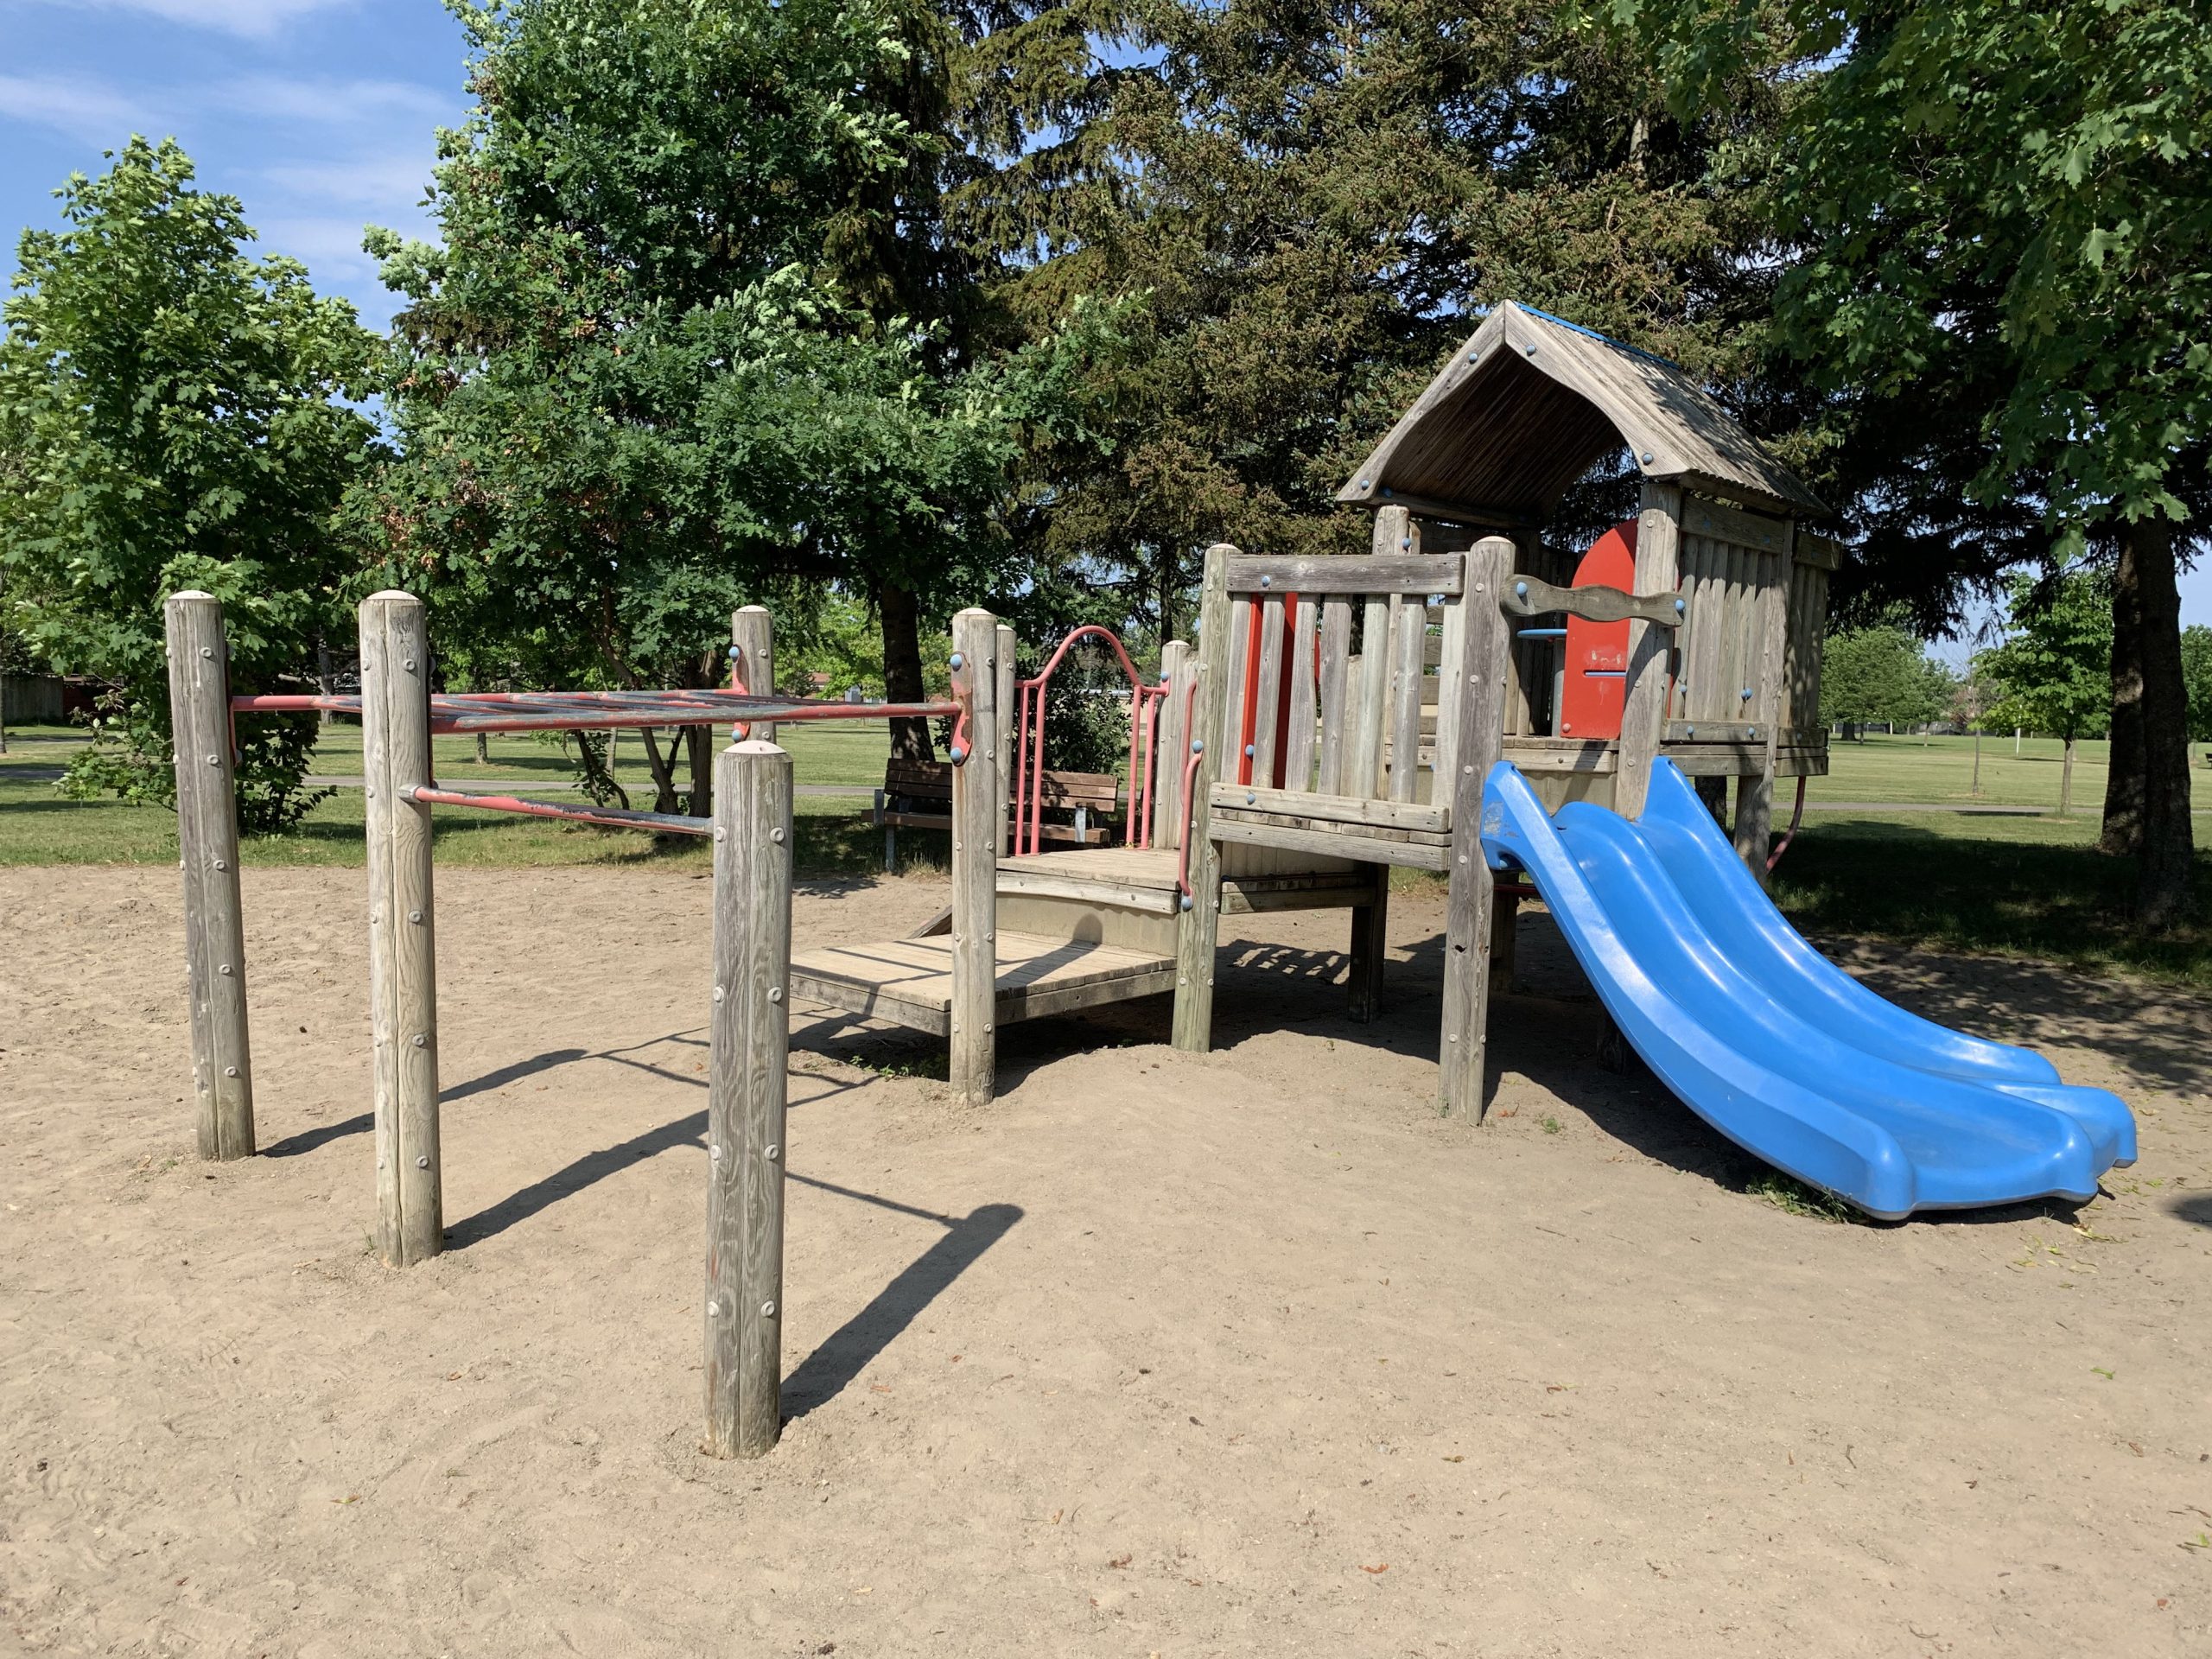 Clydesdale Park Playground before construction looking west. A wood playground is in the foreground surrounded by sand surfacing and trees.